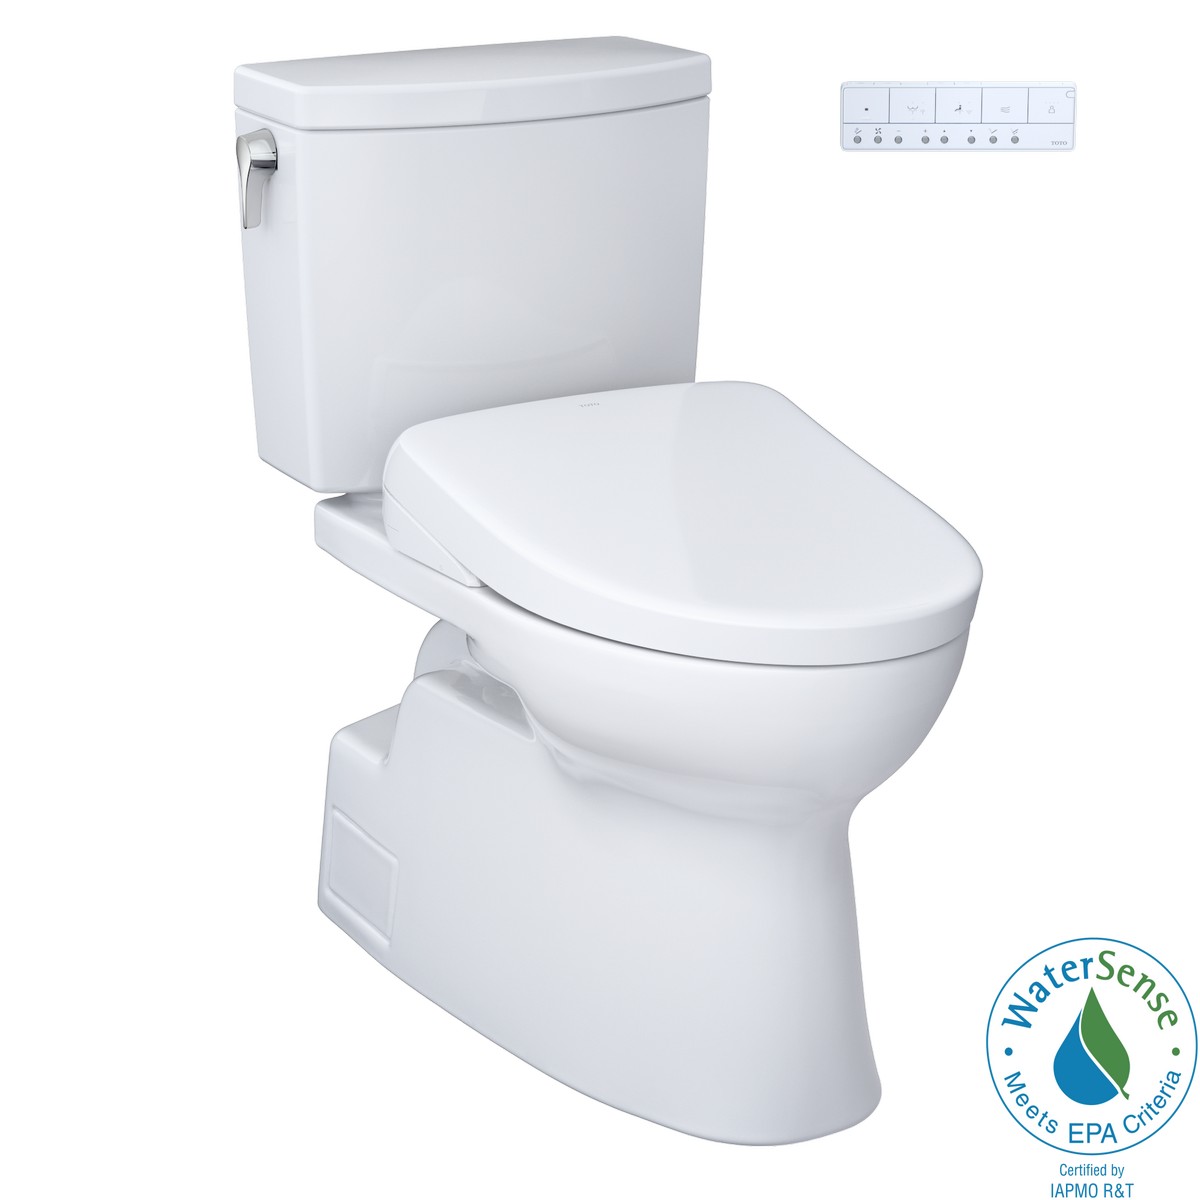 TOTO MW4744726CUF#01 WASHLET+ VESPIN II 1.0 GPF TWO PIECE ELONGATED TOILET WITH WASHLET+ S7 BIDET SEAT IN COTTON WHITE